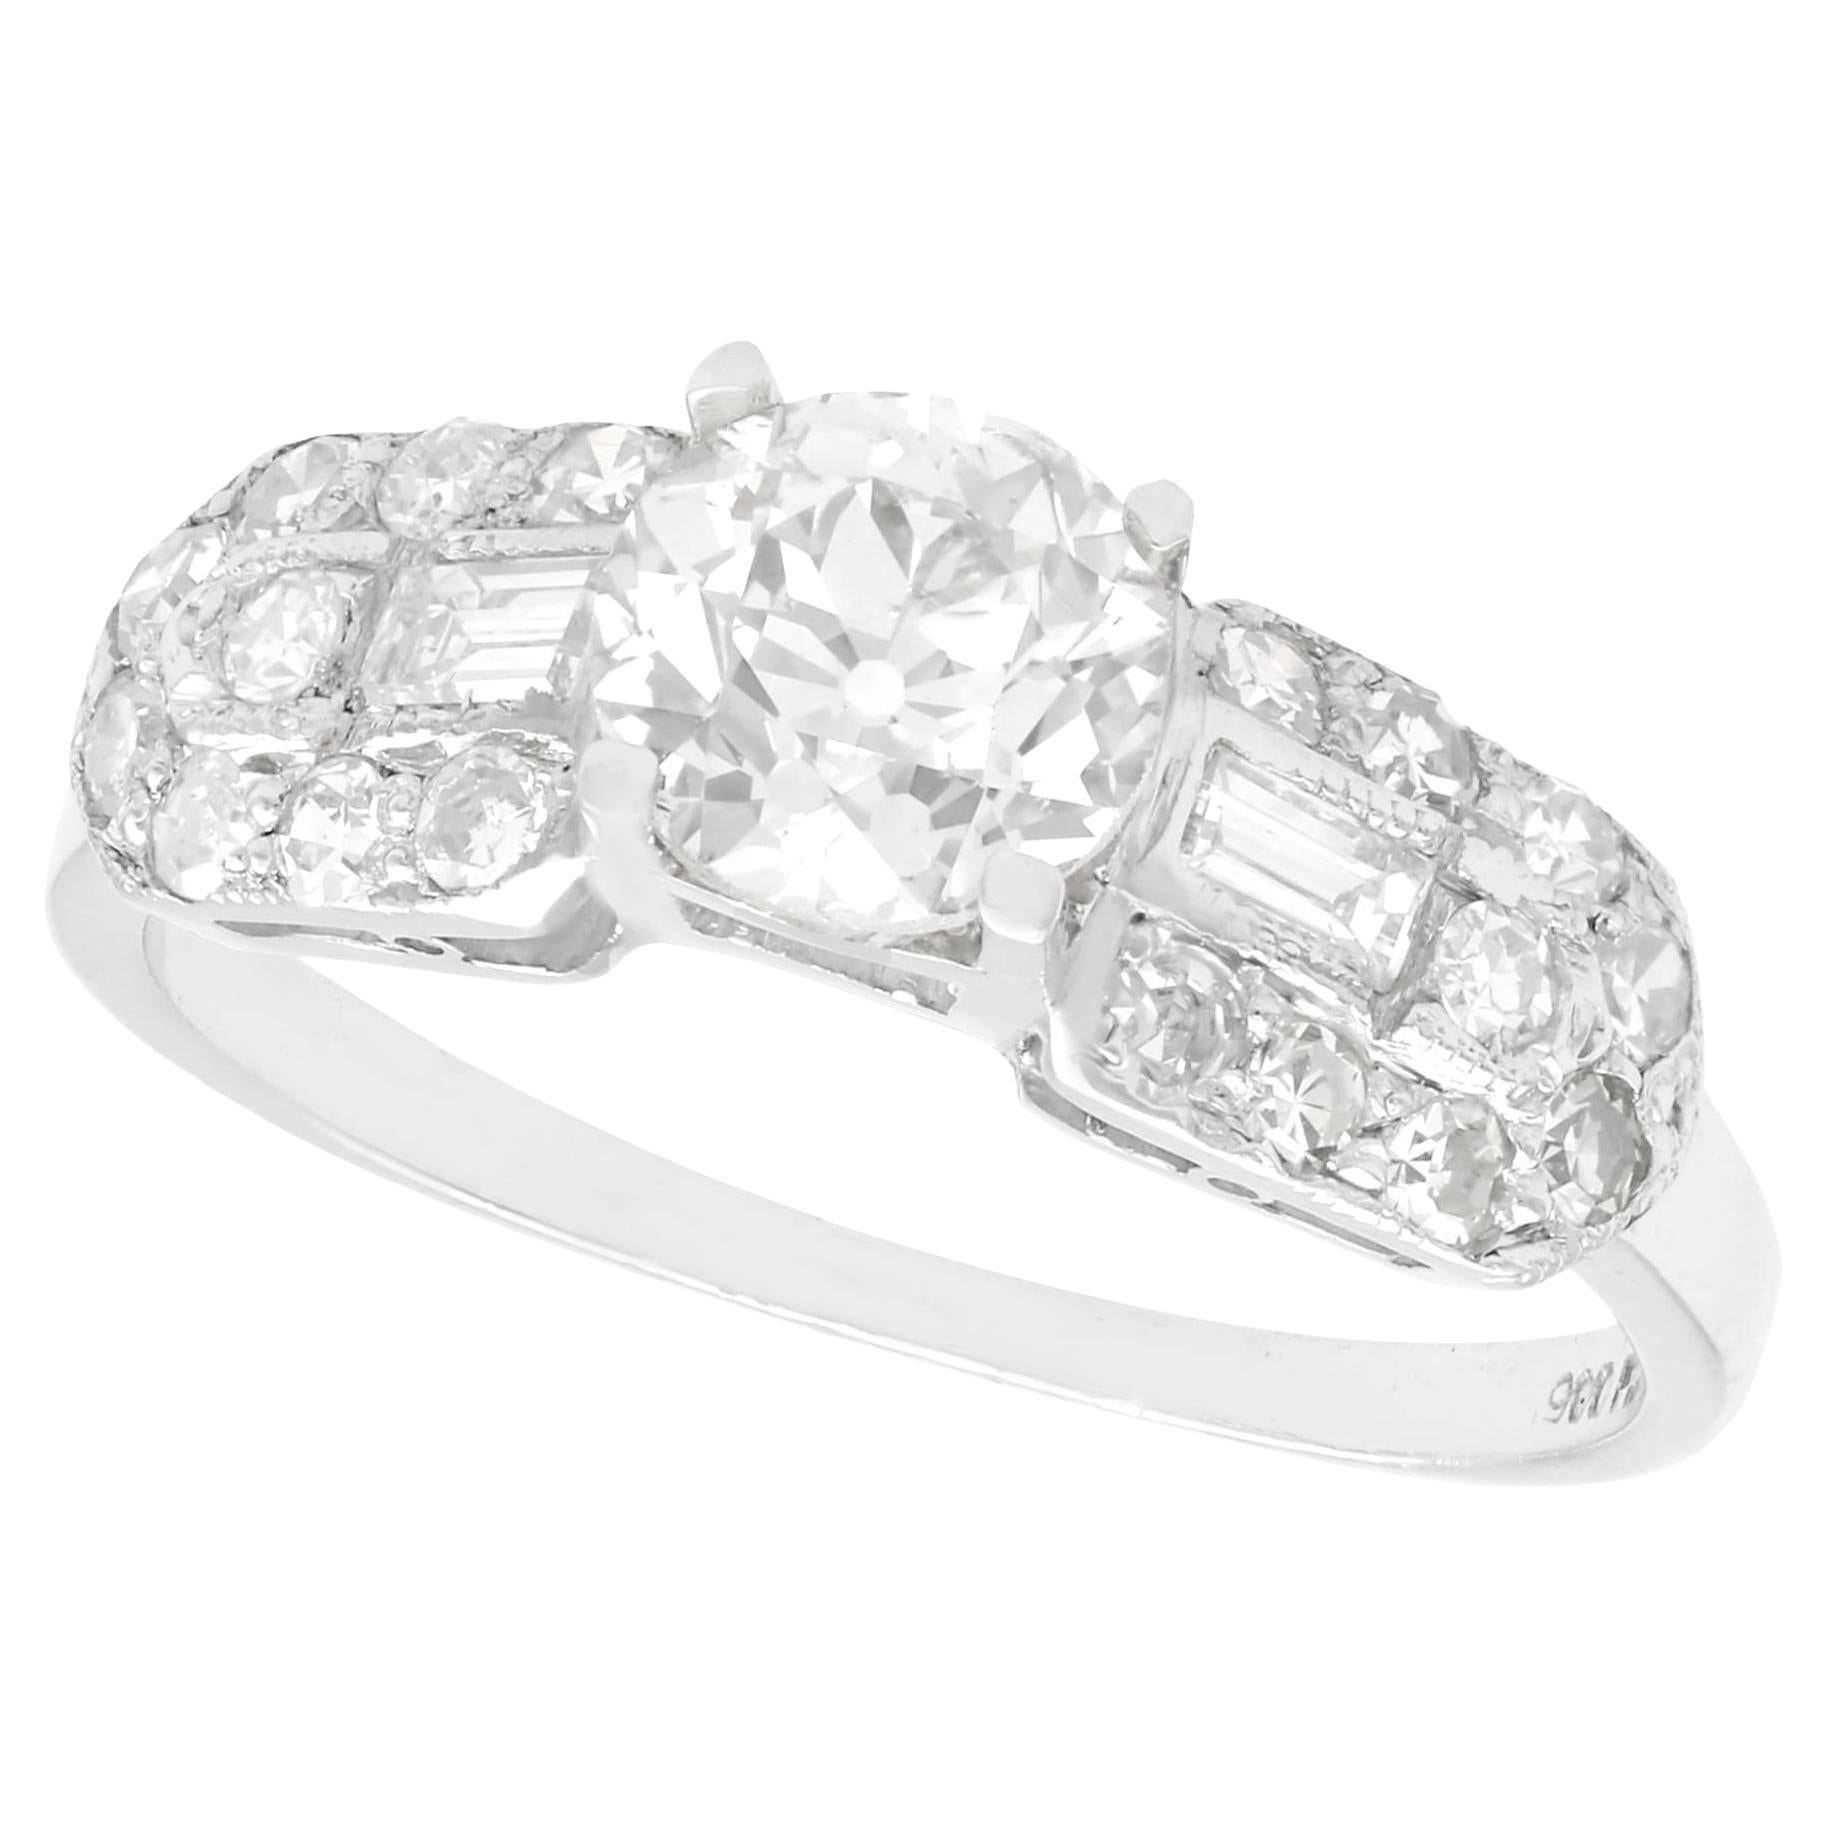 1940s 1.20 Carat Diamond and Platinum Engagement Ring For Sale